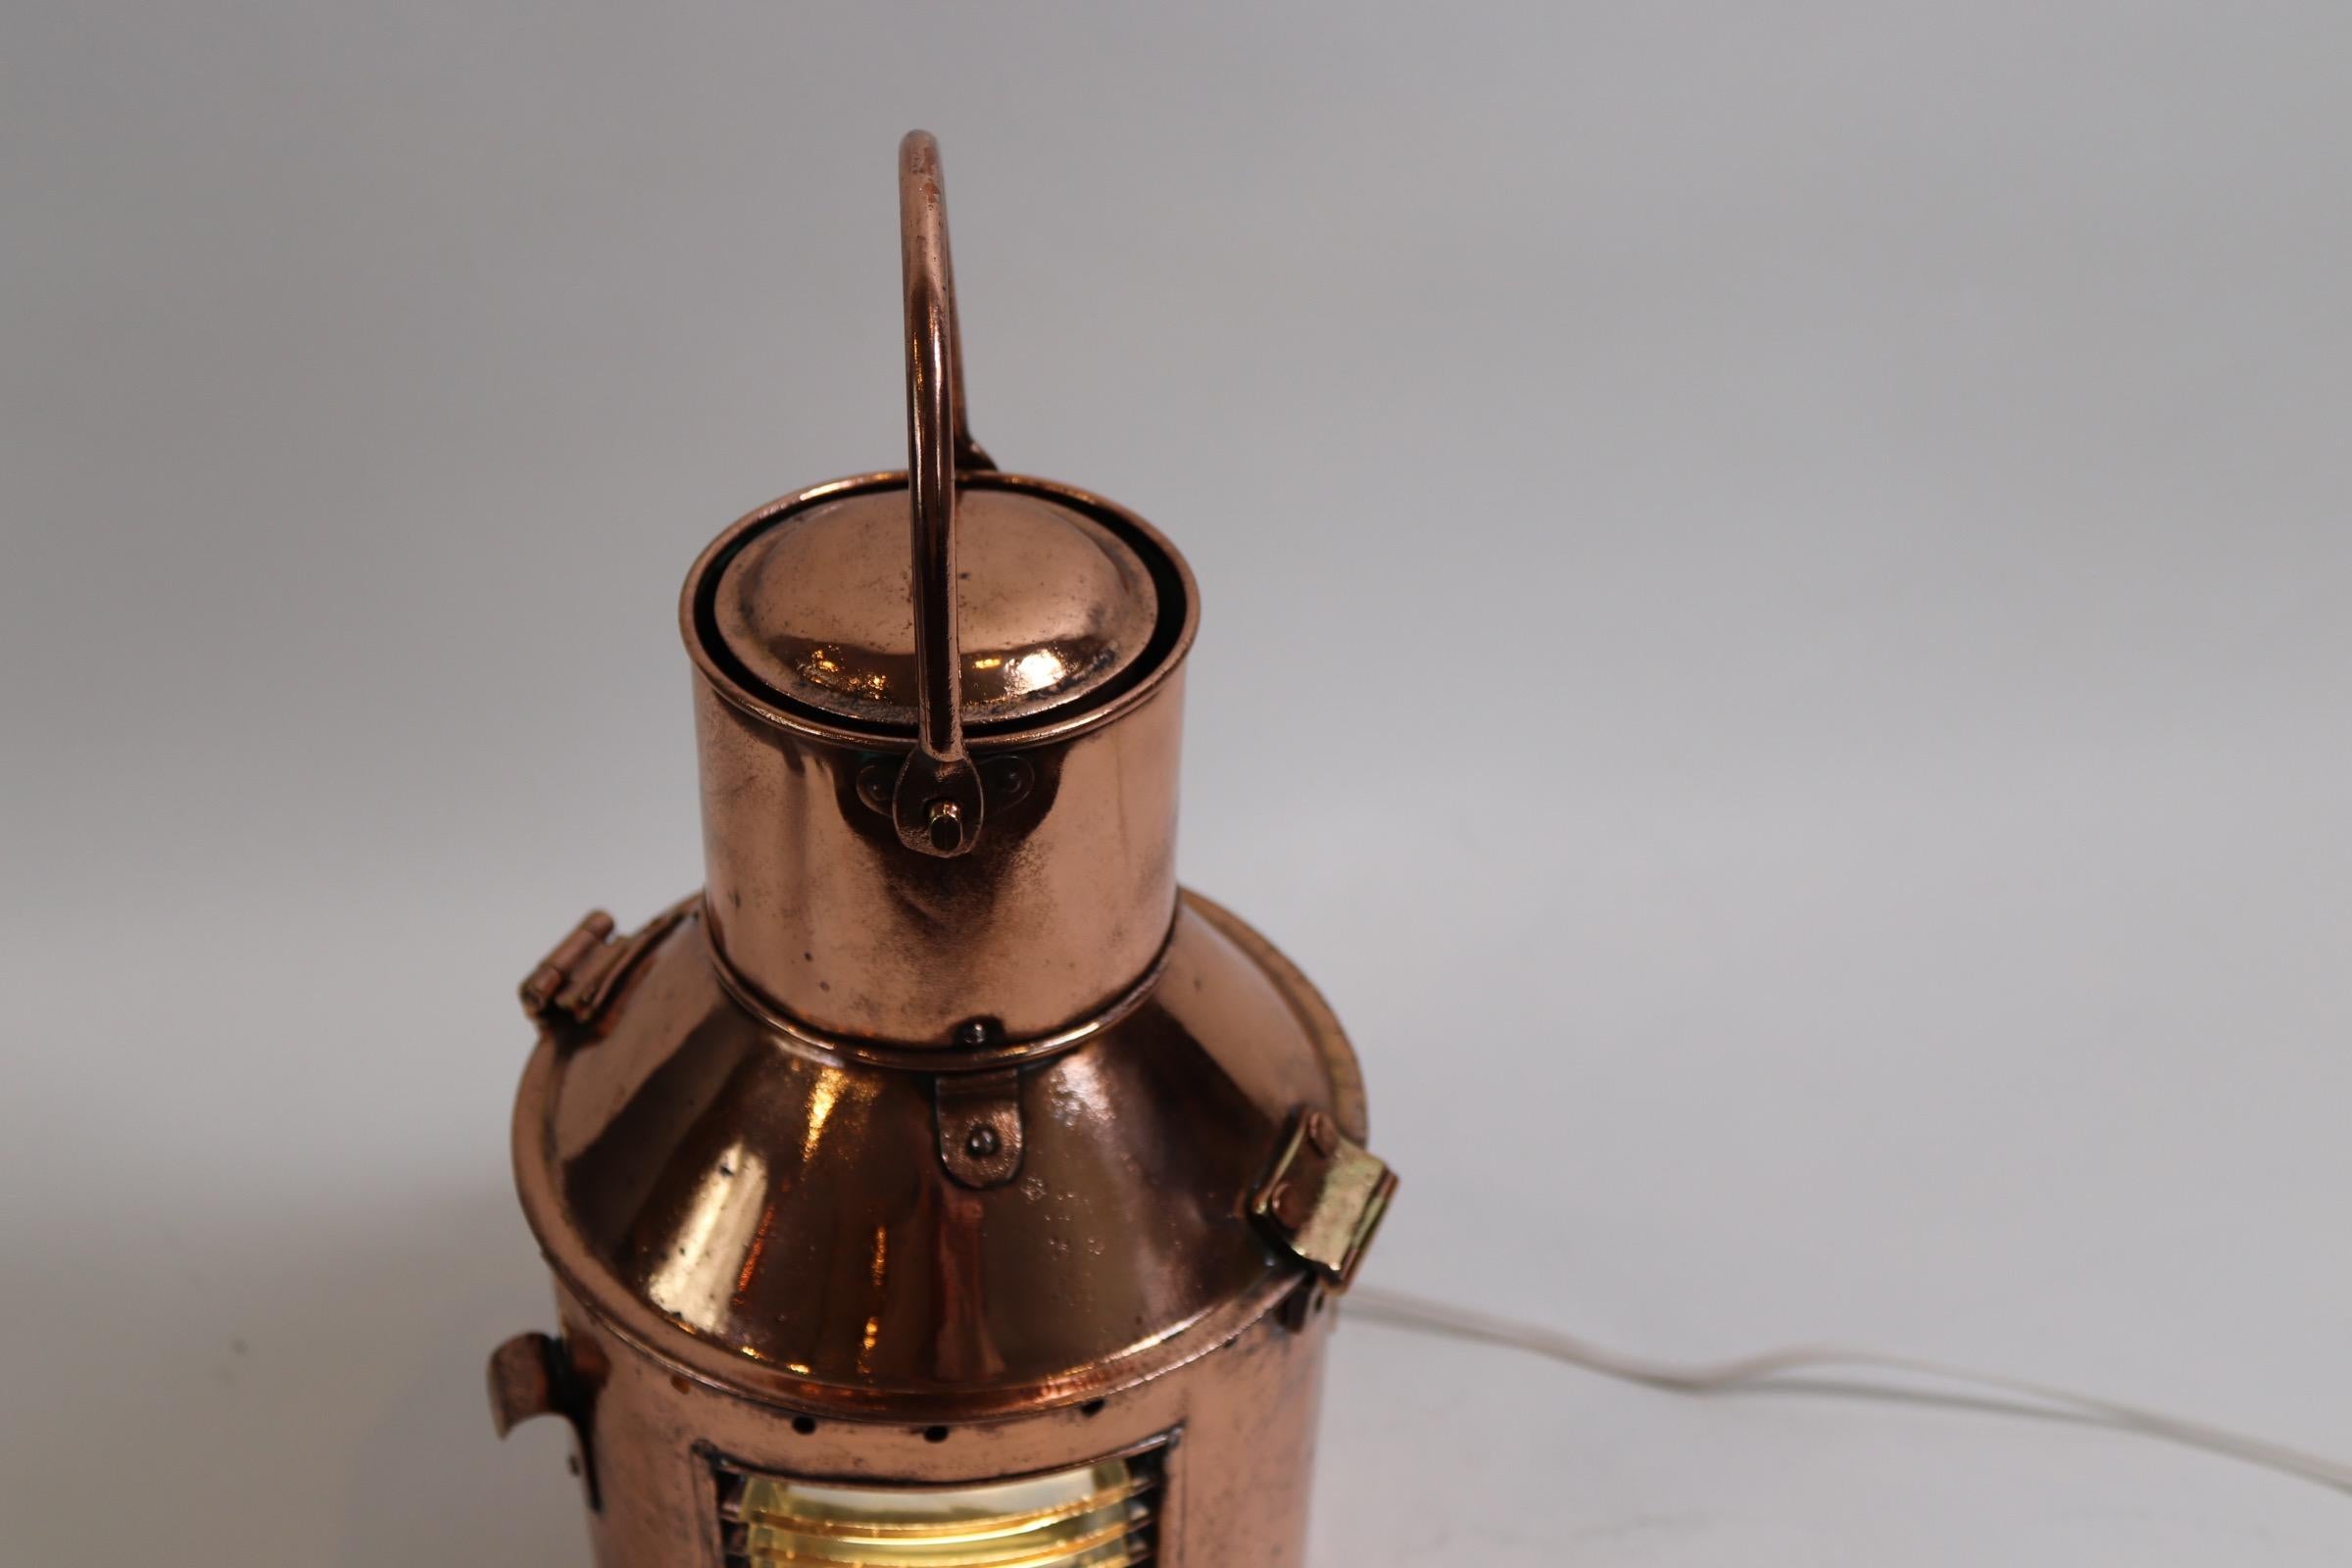 Solid copper ships signal lantern with hinged top, carry handle and fresnel lens. Wired for home use. Interior is missing the signal apparatus. Weight is 5 pounds.